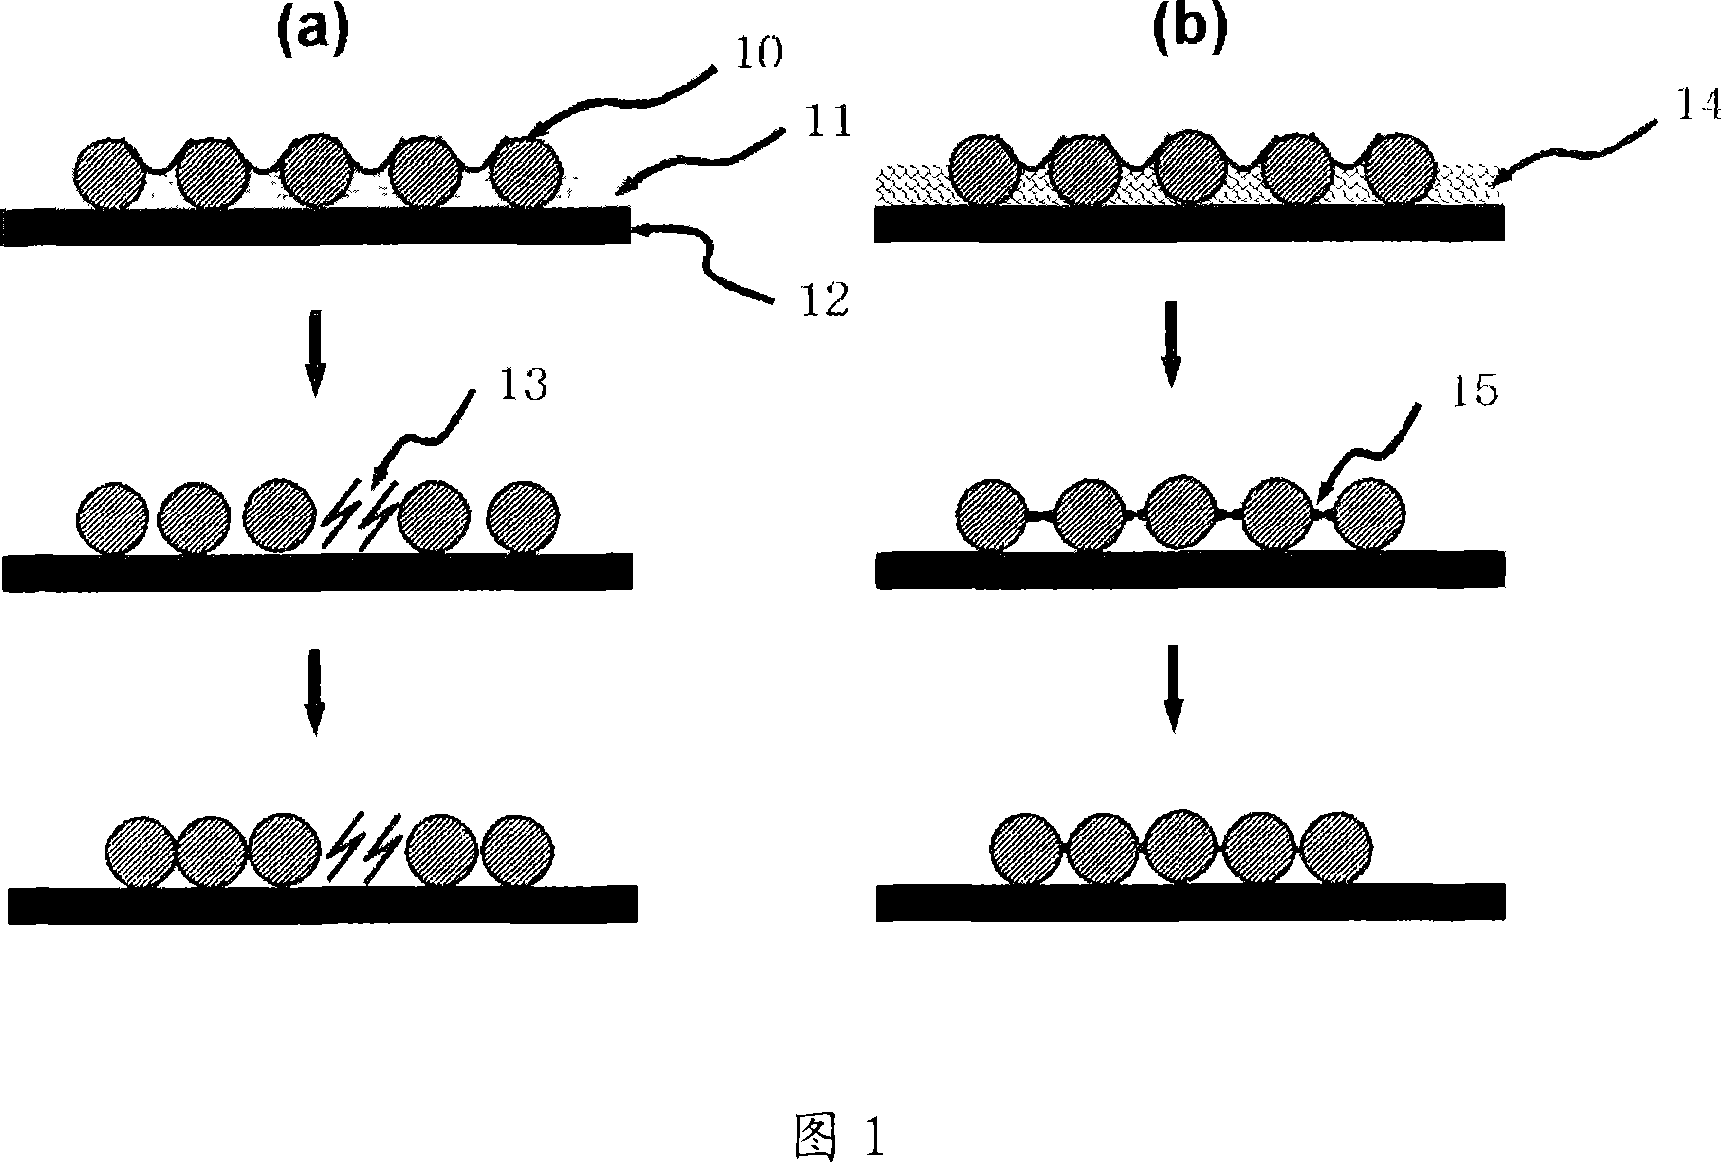 Colloidal photonic crystals using colloidal nanoparticles and method for preparation thereof